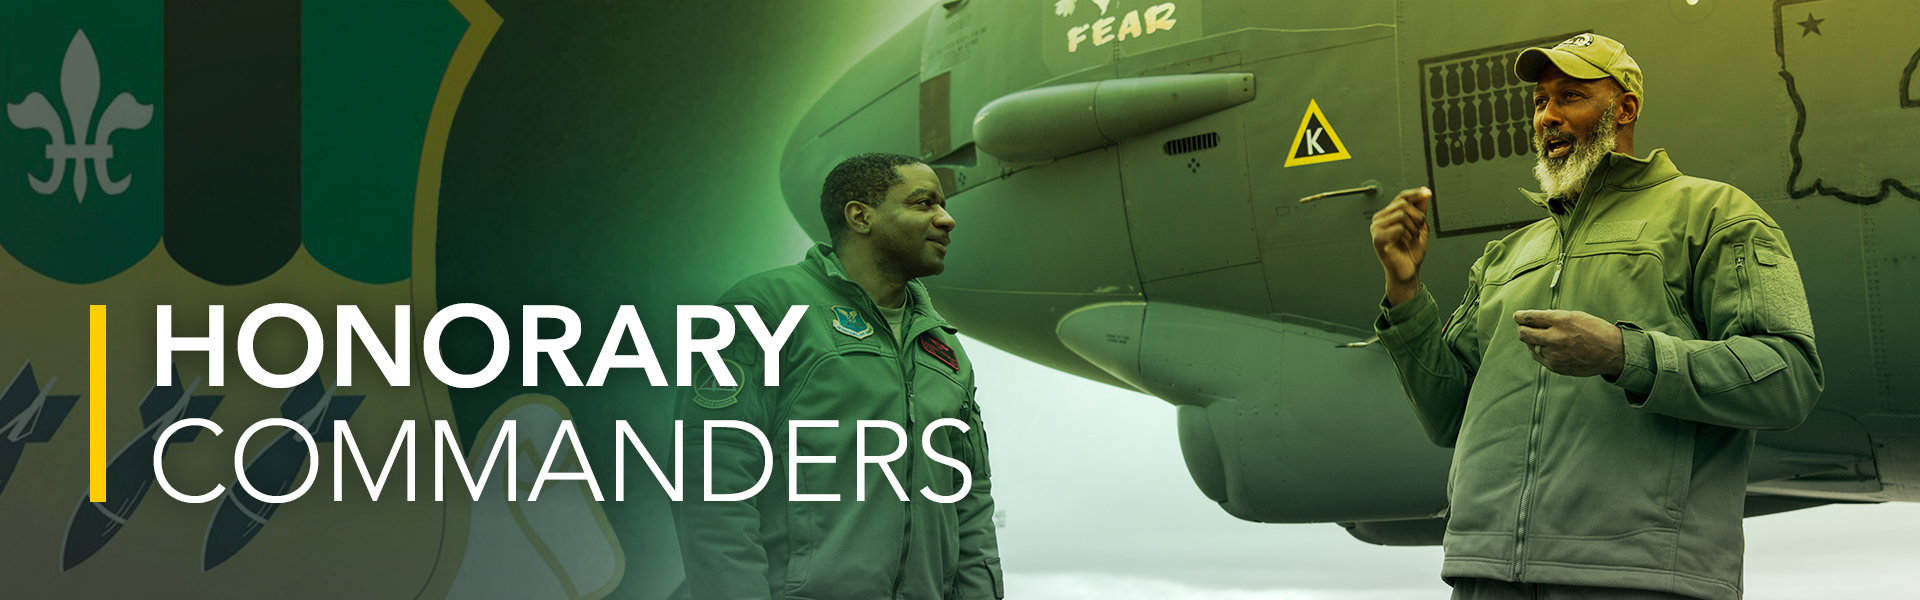 Photo header for Honorary Commanders page with Karl Malone